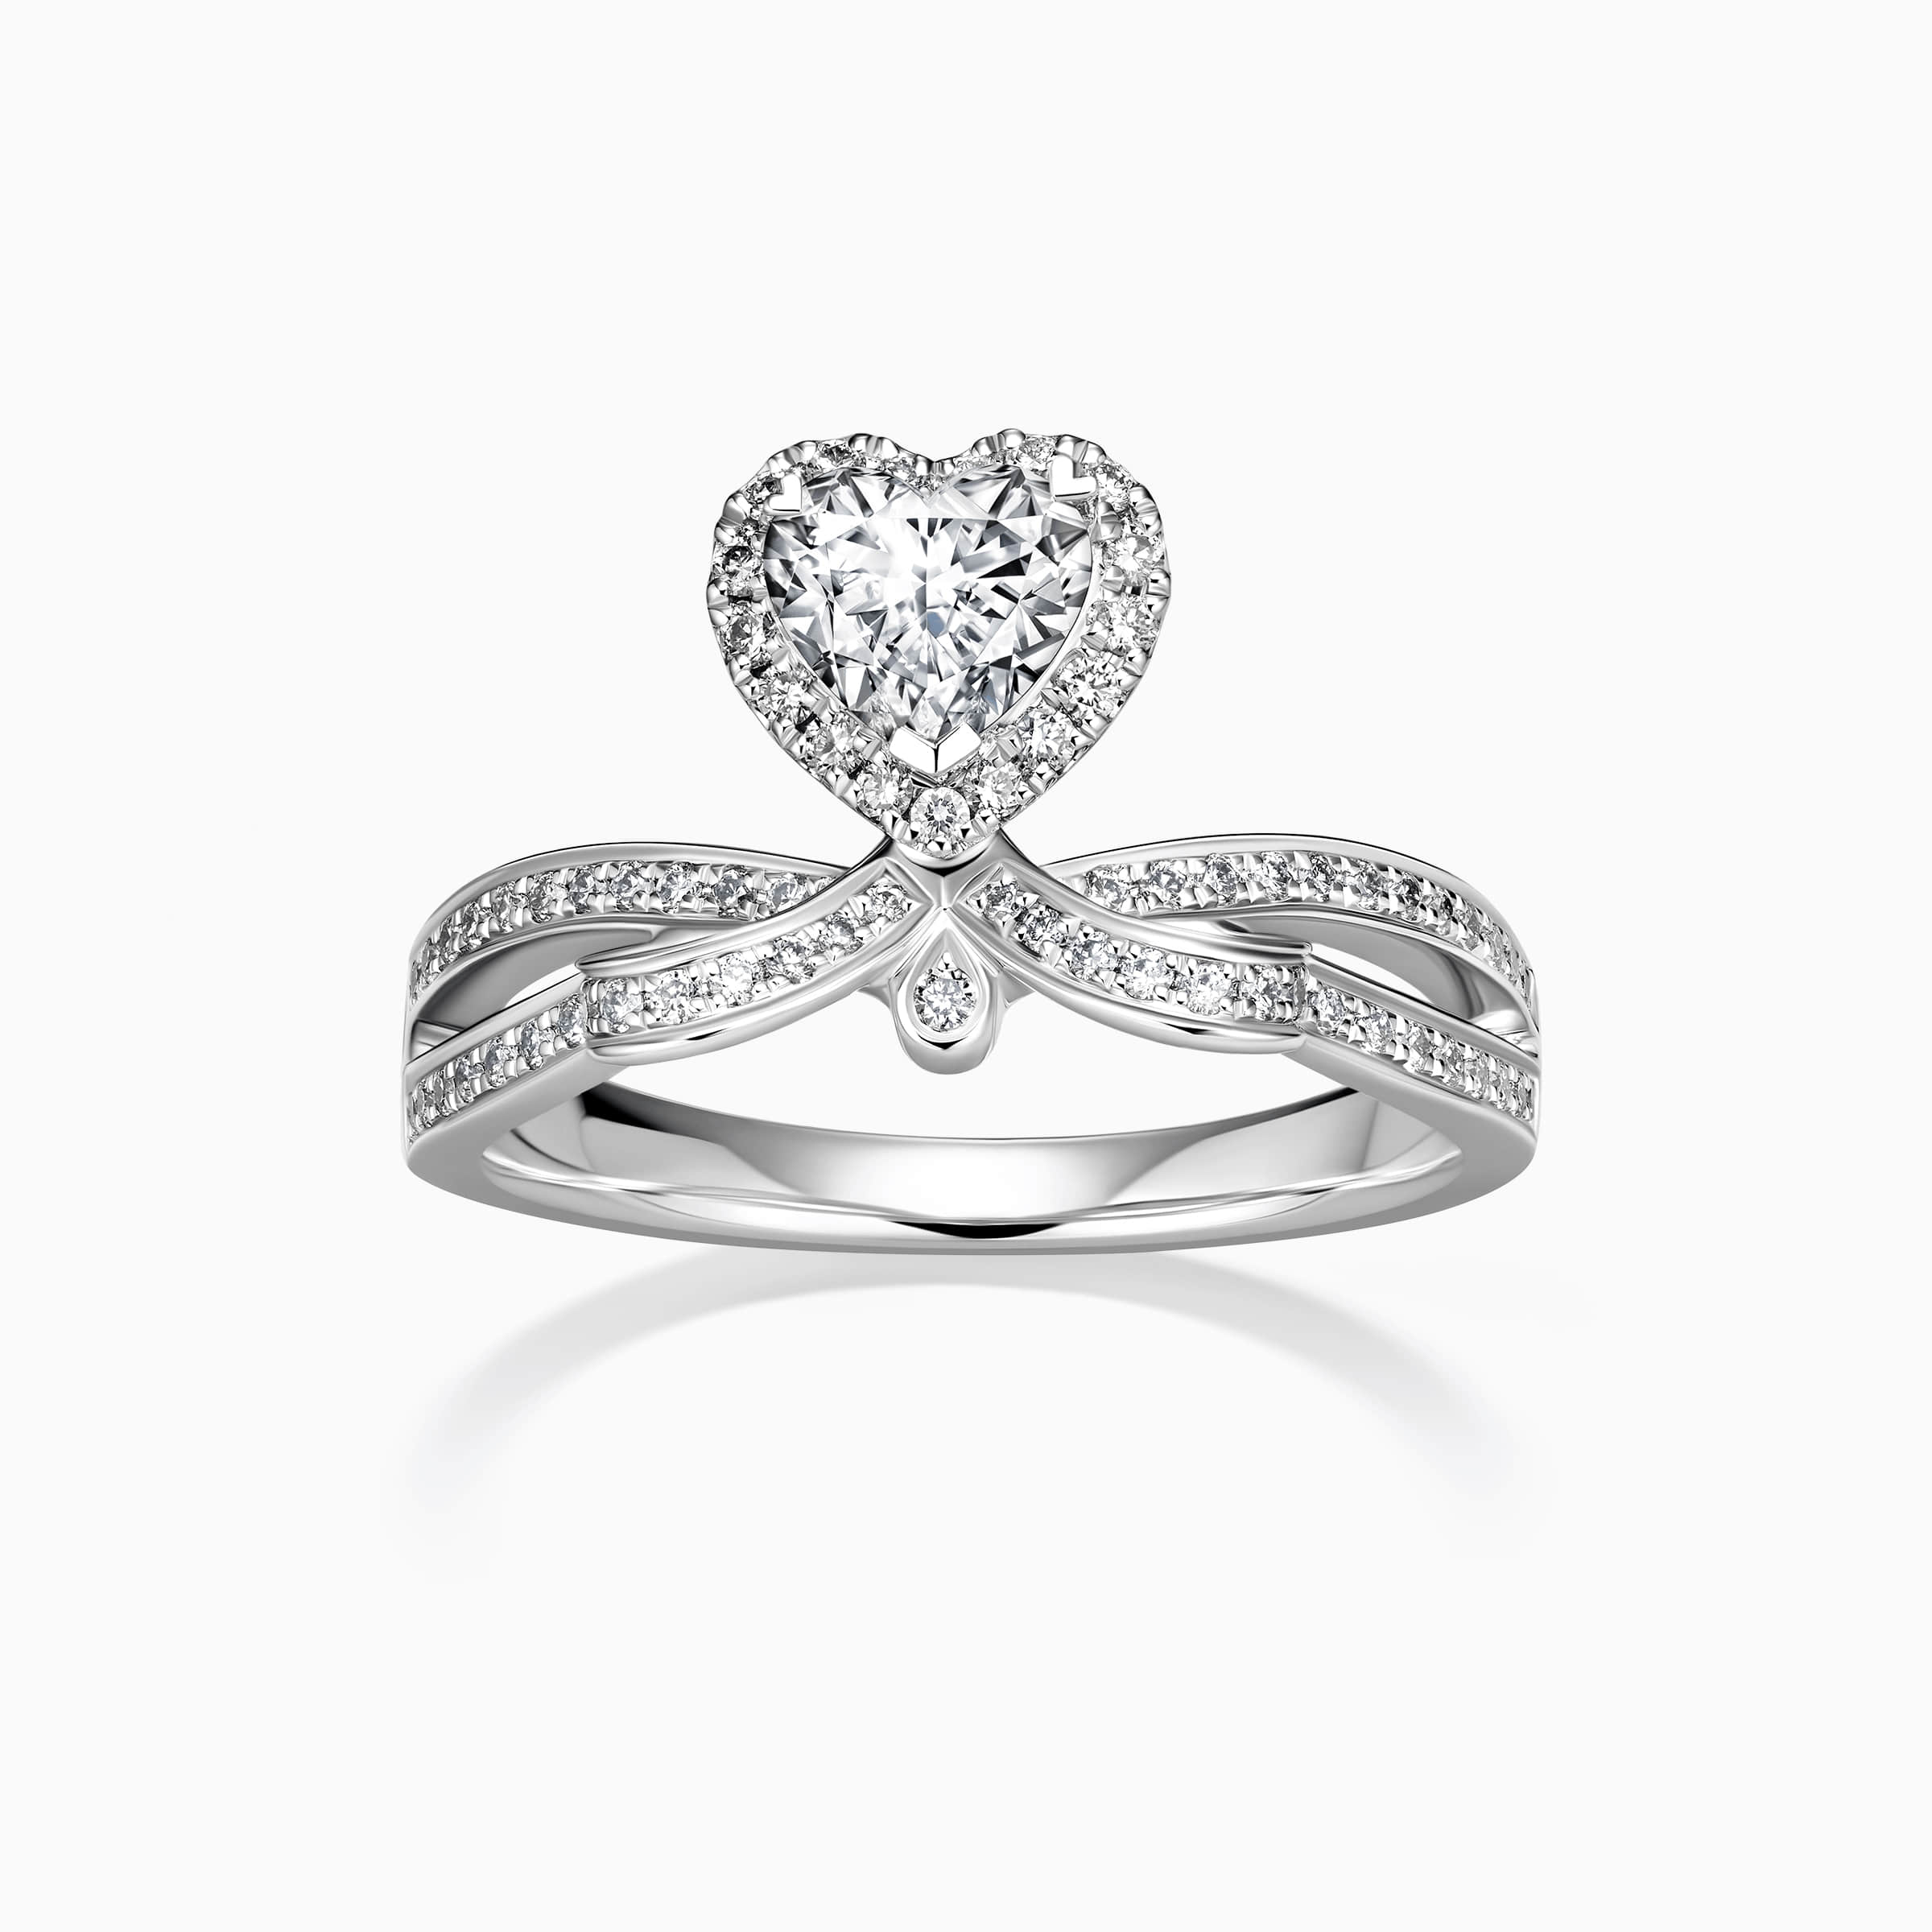 Darry Ring crown engagement ring front view